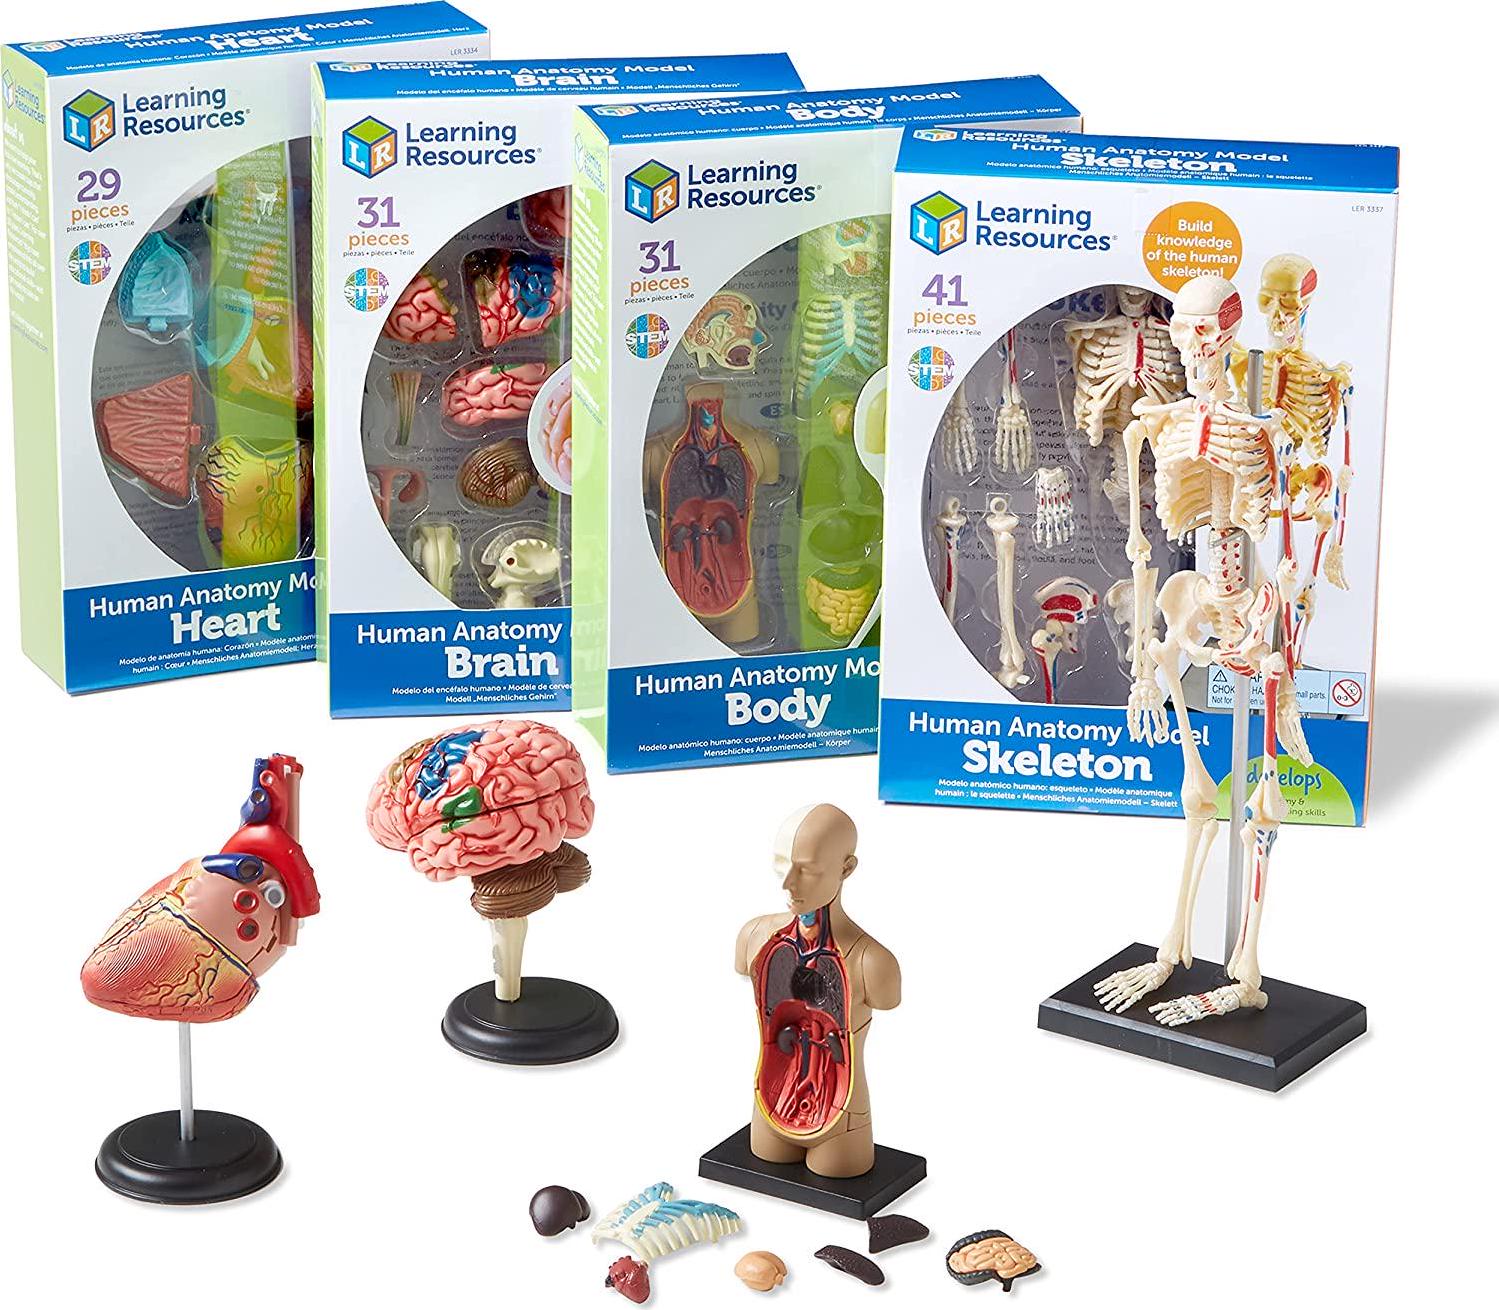 Learning Resources, Learning Resources Anatomy Models Bundle Set, Brain, Body, Heart, Skeleton, Classroom Demonstration Tools, Grades 3+/Ages 5+